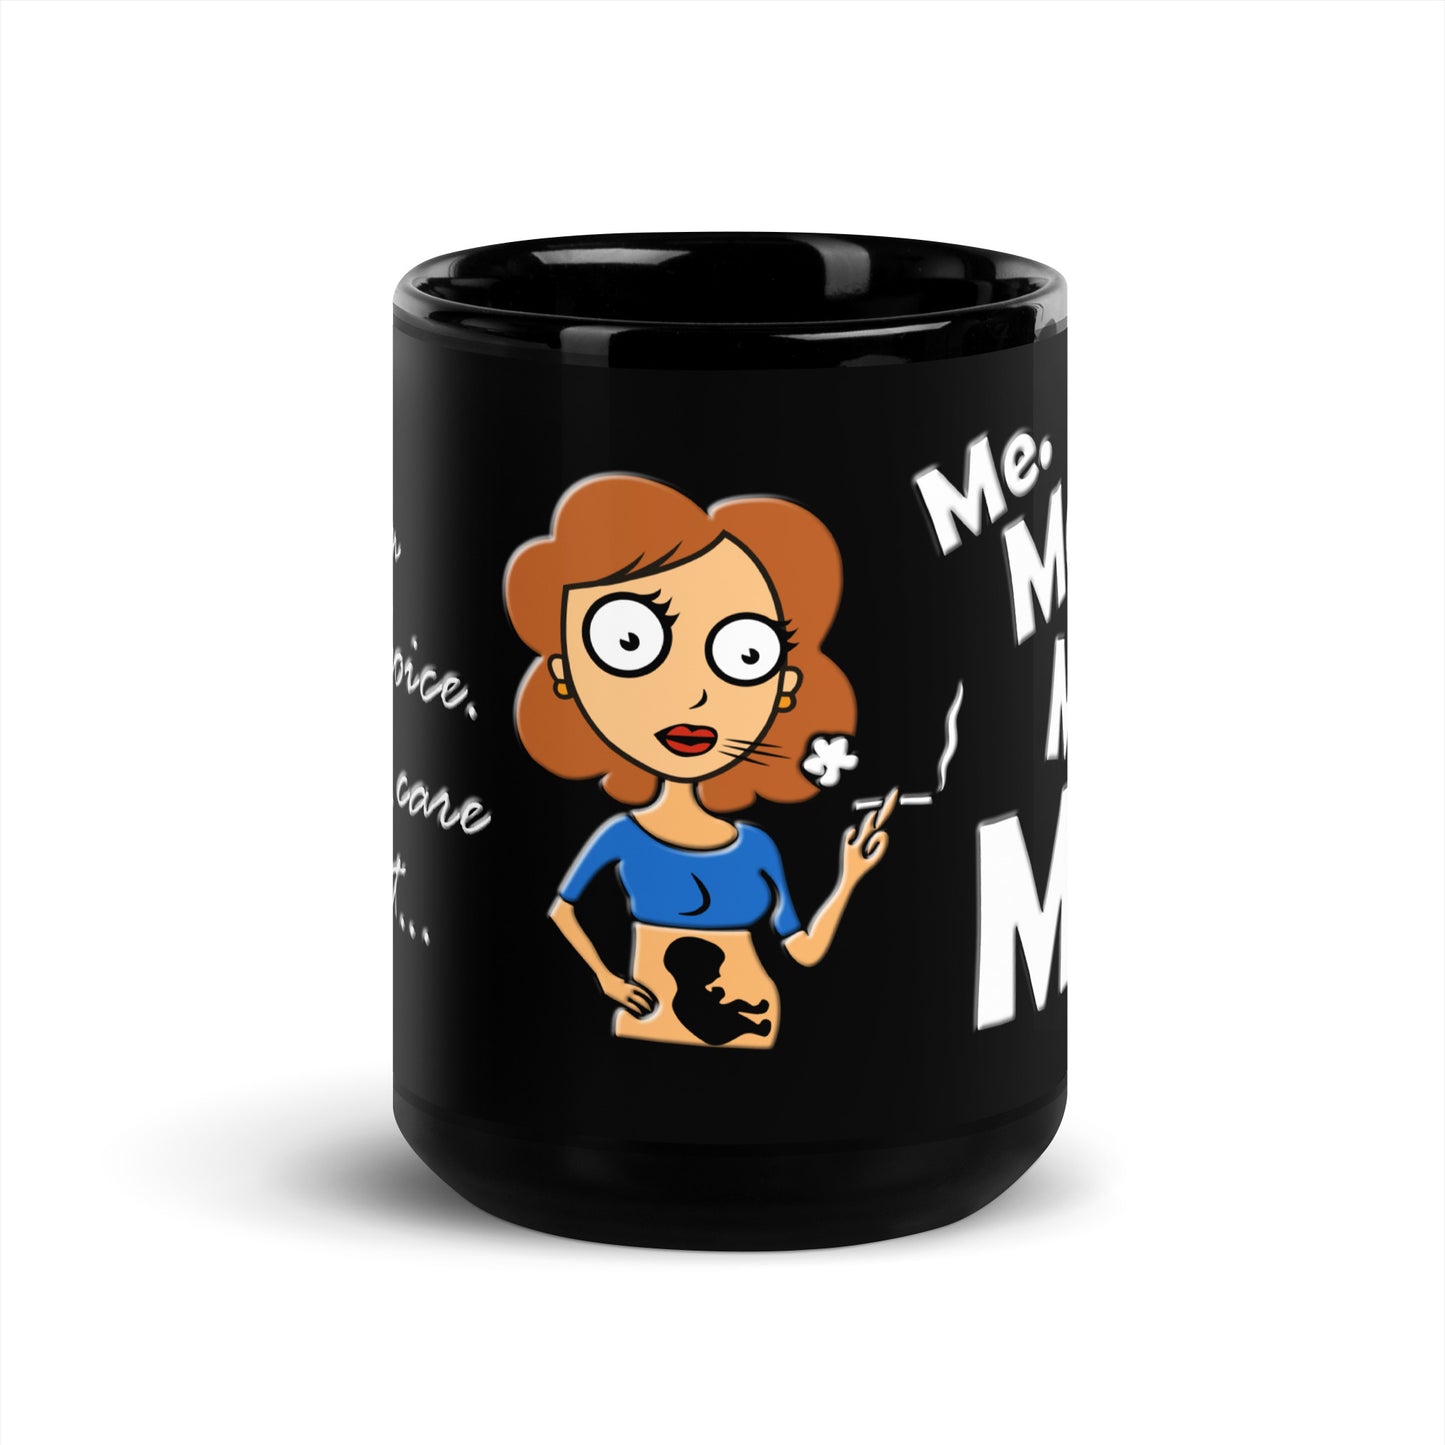 A015 Mug - Black Glossy Ceramic Mug Featuring a Graphic of a Young Pregnant Woman Smoking, with the Text “I’m Pro-choice. I Only Care About Me. Me. Me. Me. Me!”